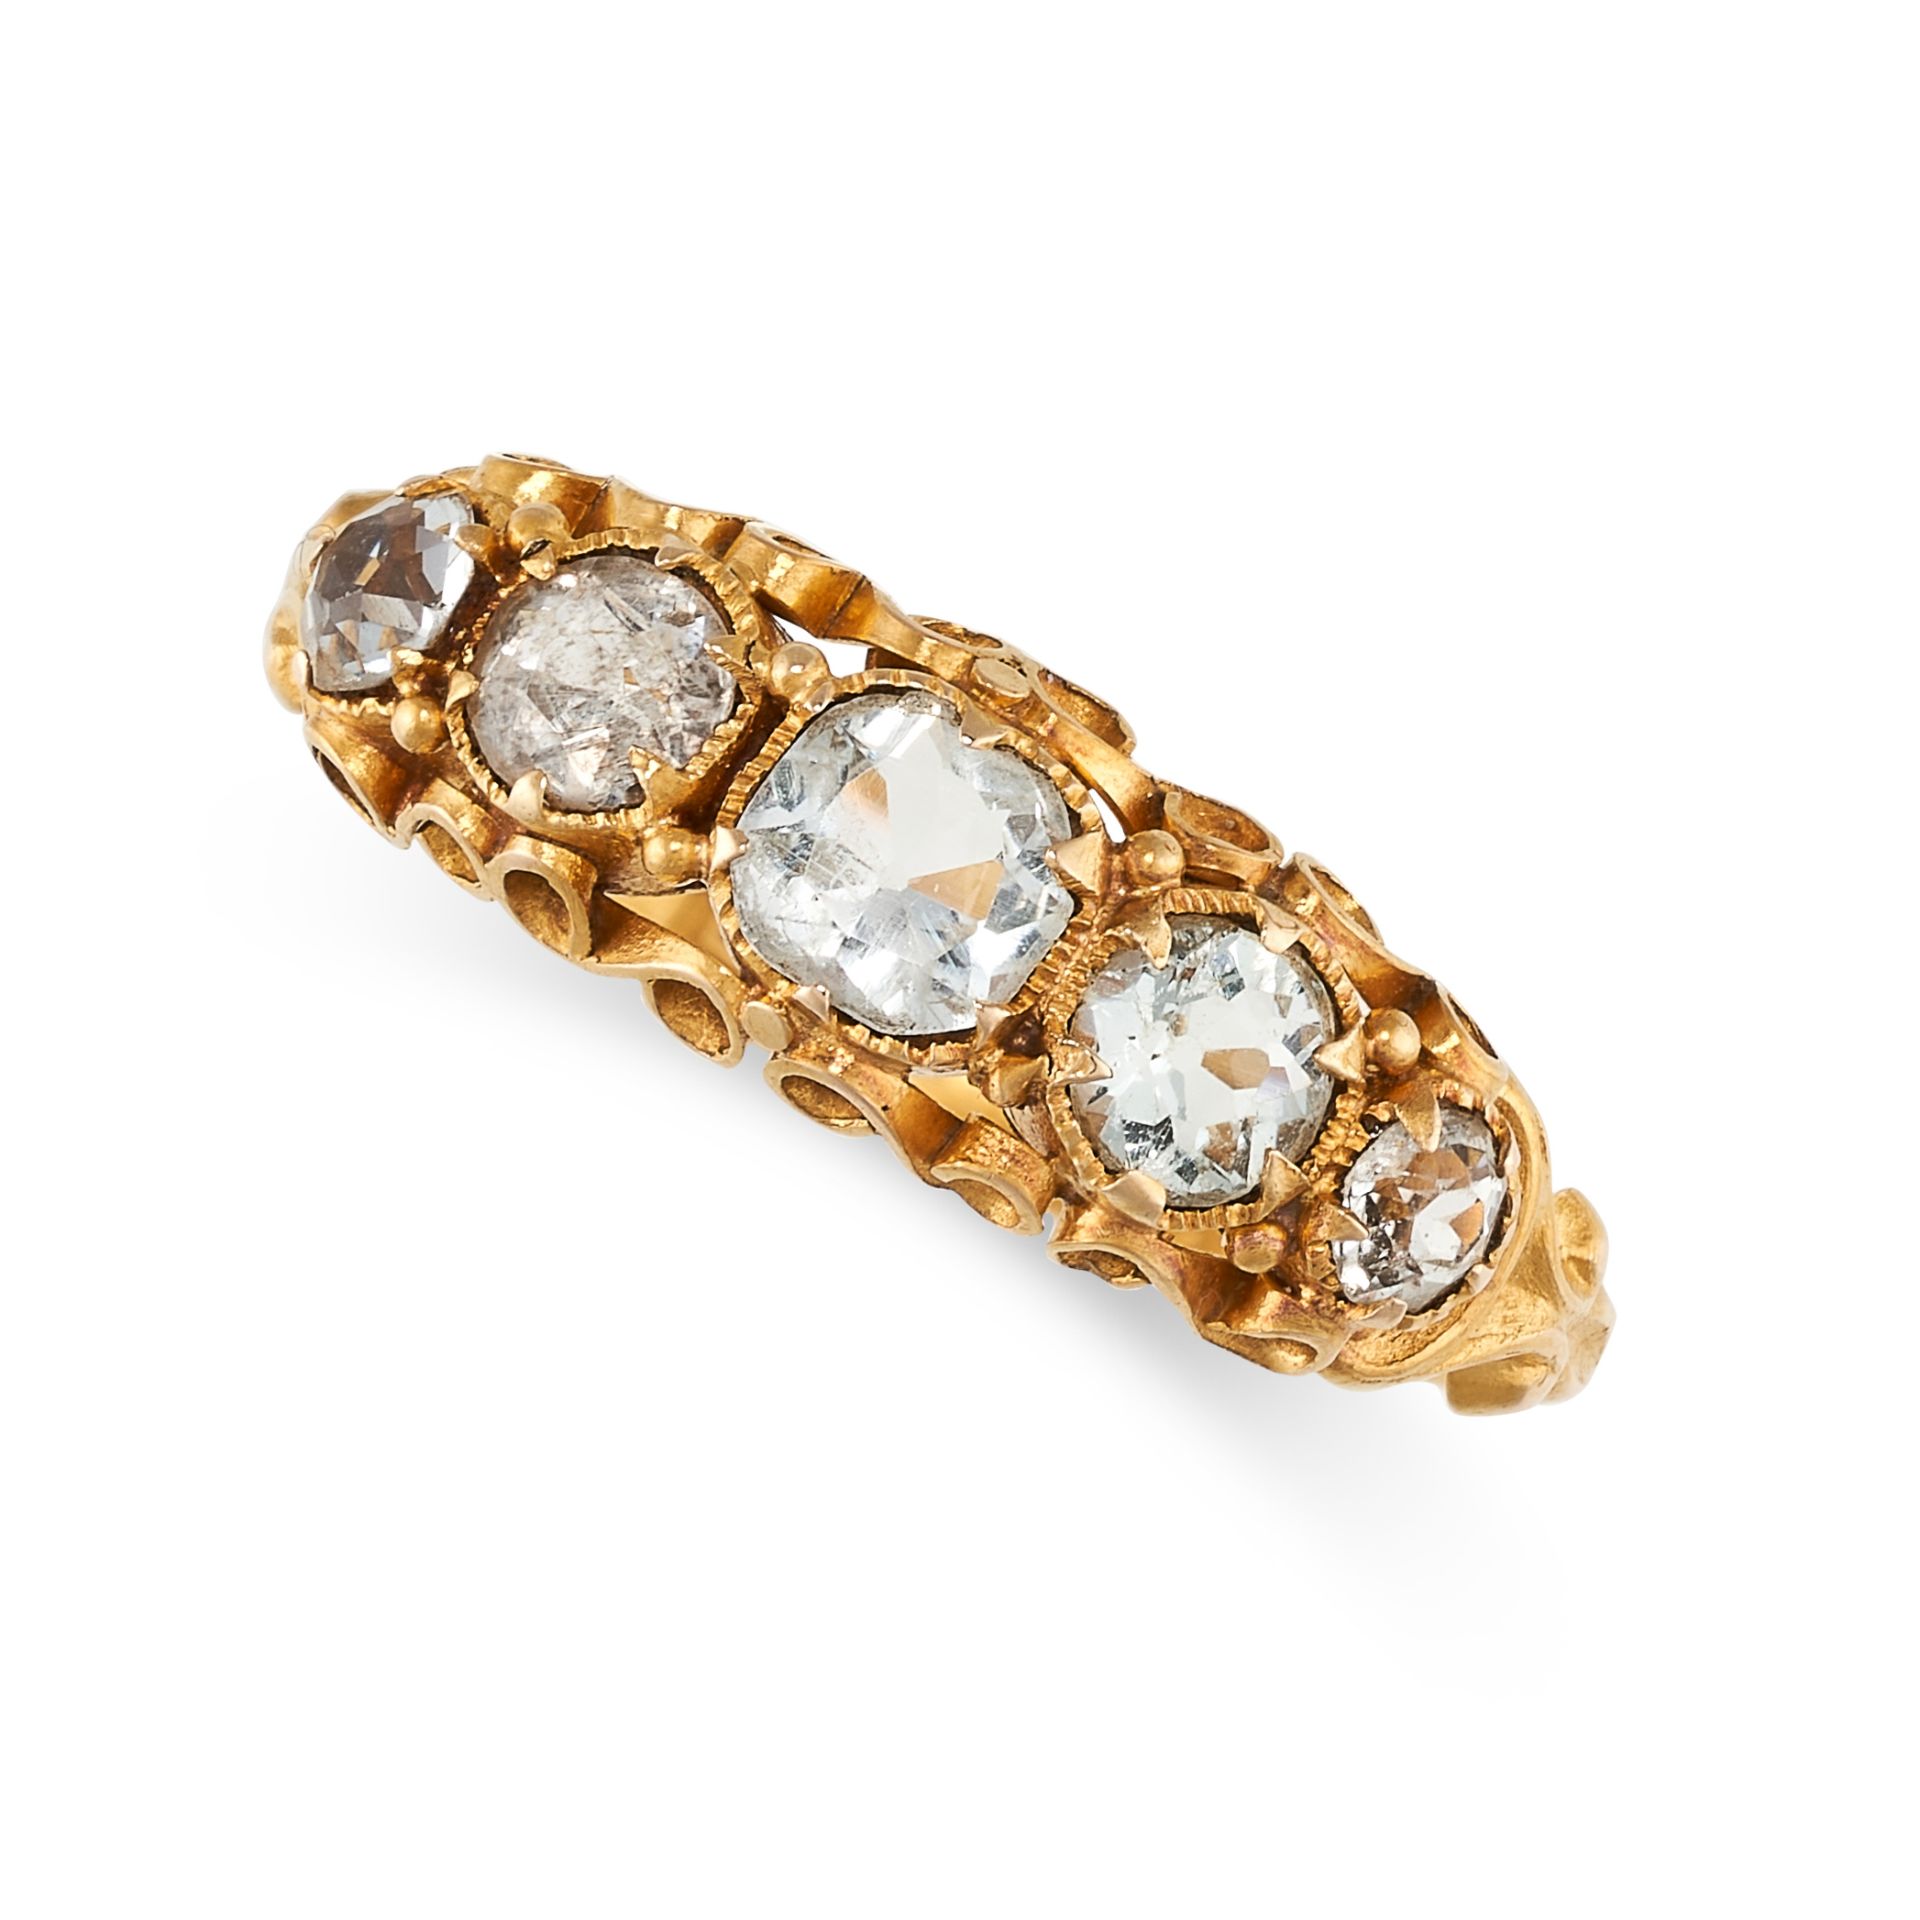 NO RESERVE - AN ANTIQUE VICTORIAN AQUAMARINE RING, 1864 in 15ct yellow gold, set with a row of